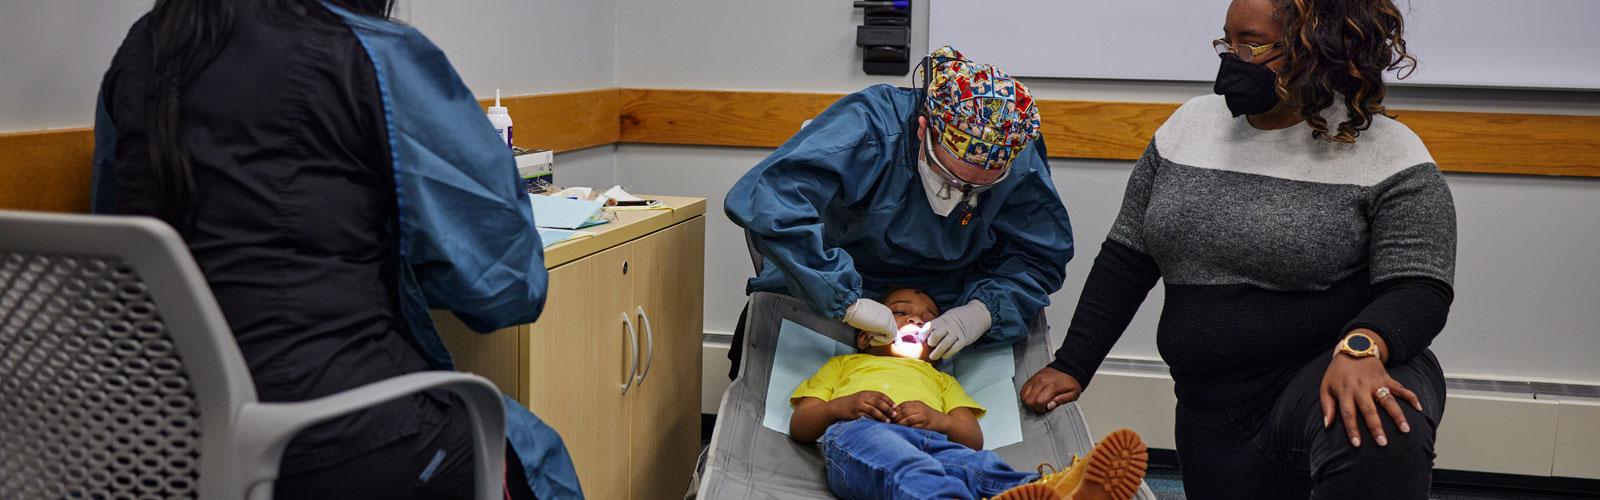 A Case Western Reserve University dental student provides care to a young patient with two other adults in the room